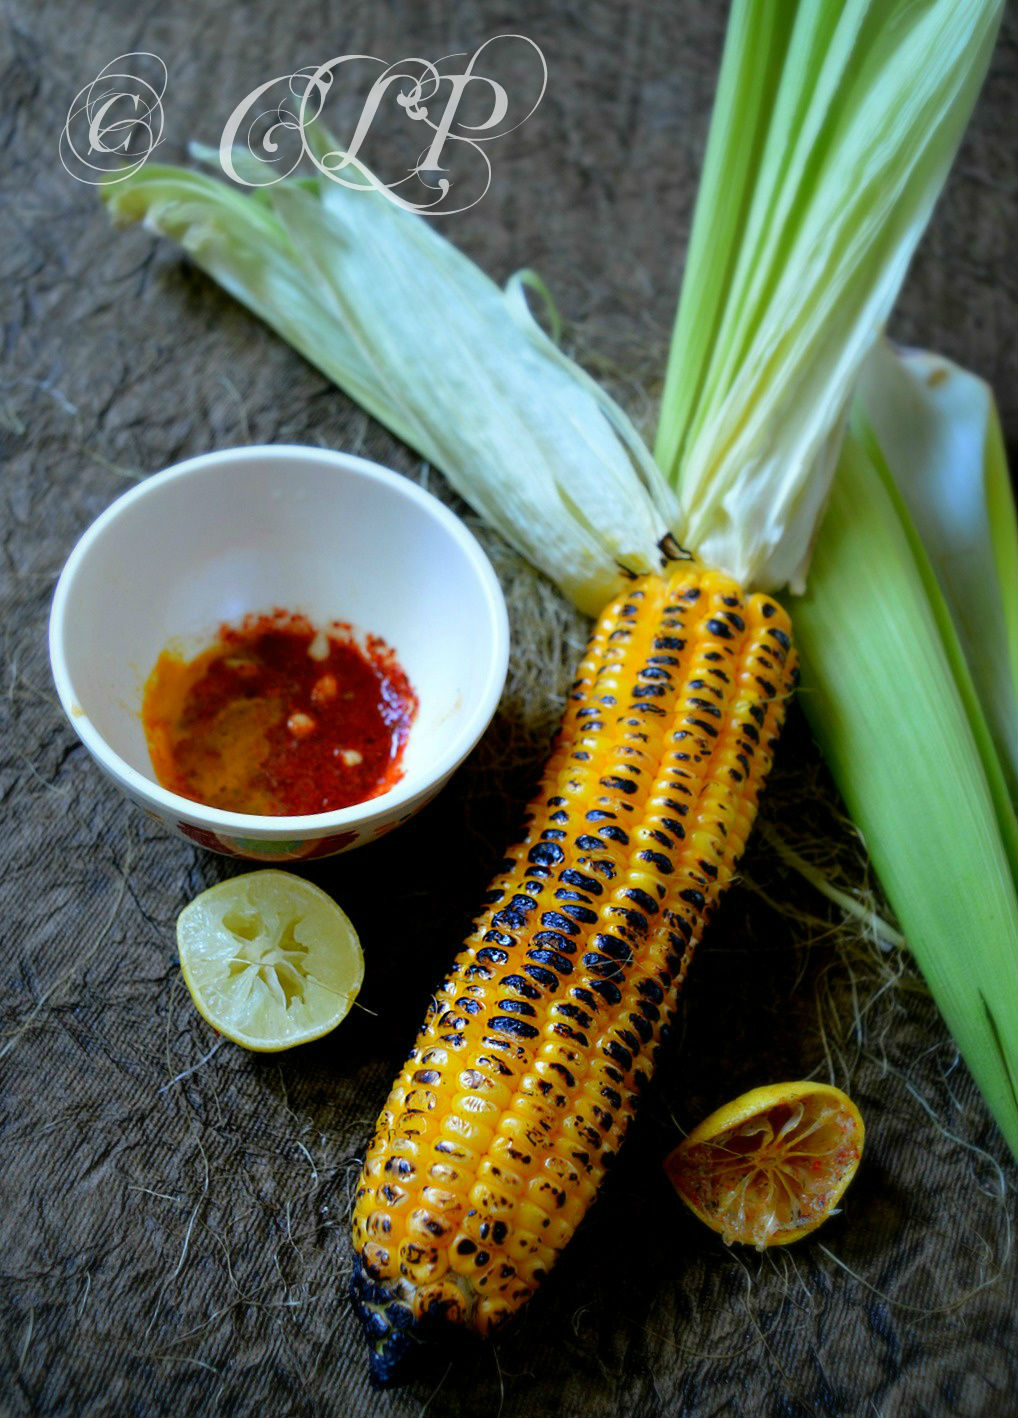 Spicy stove roasted corn on the cob